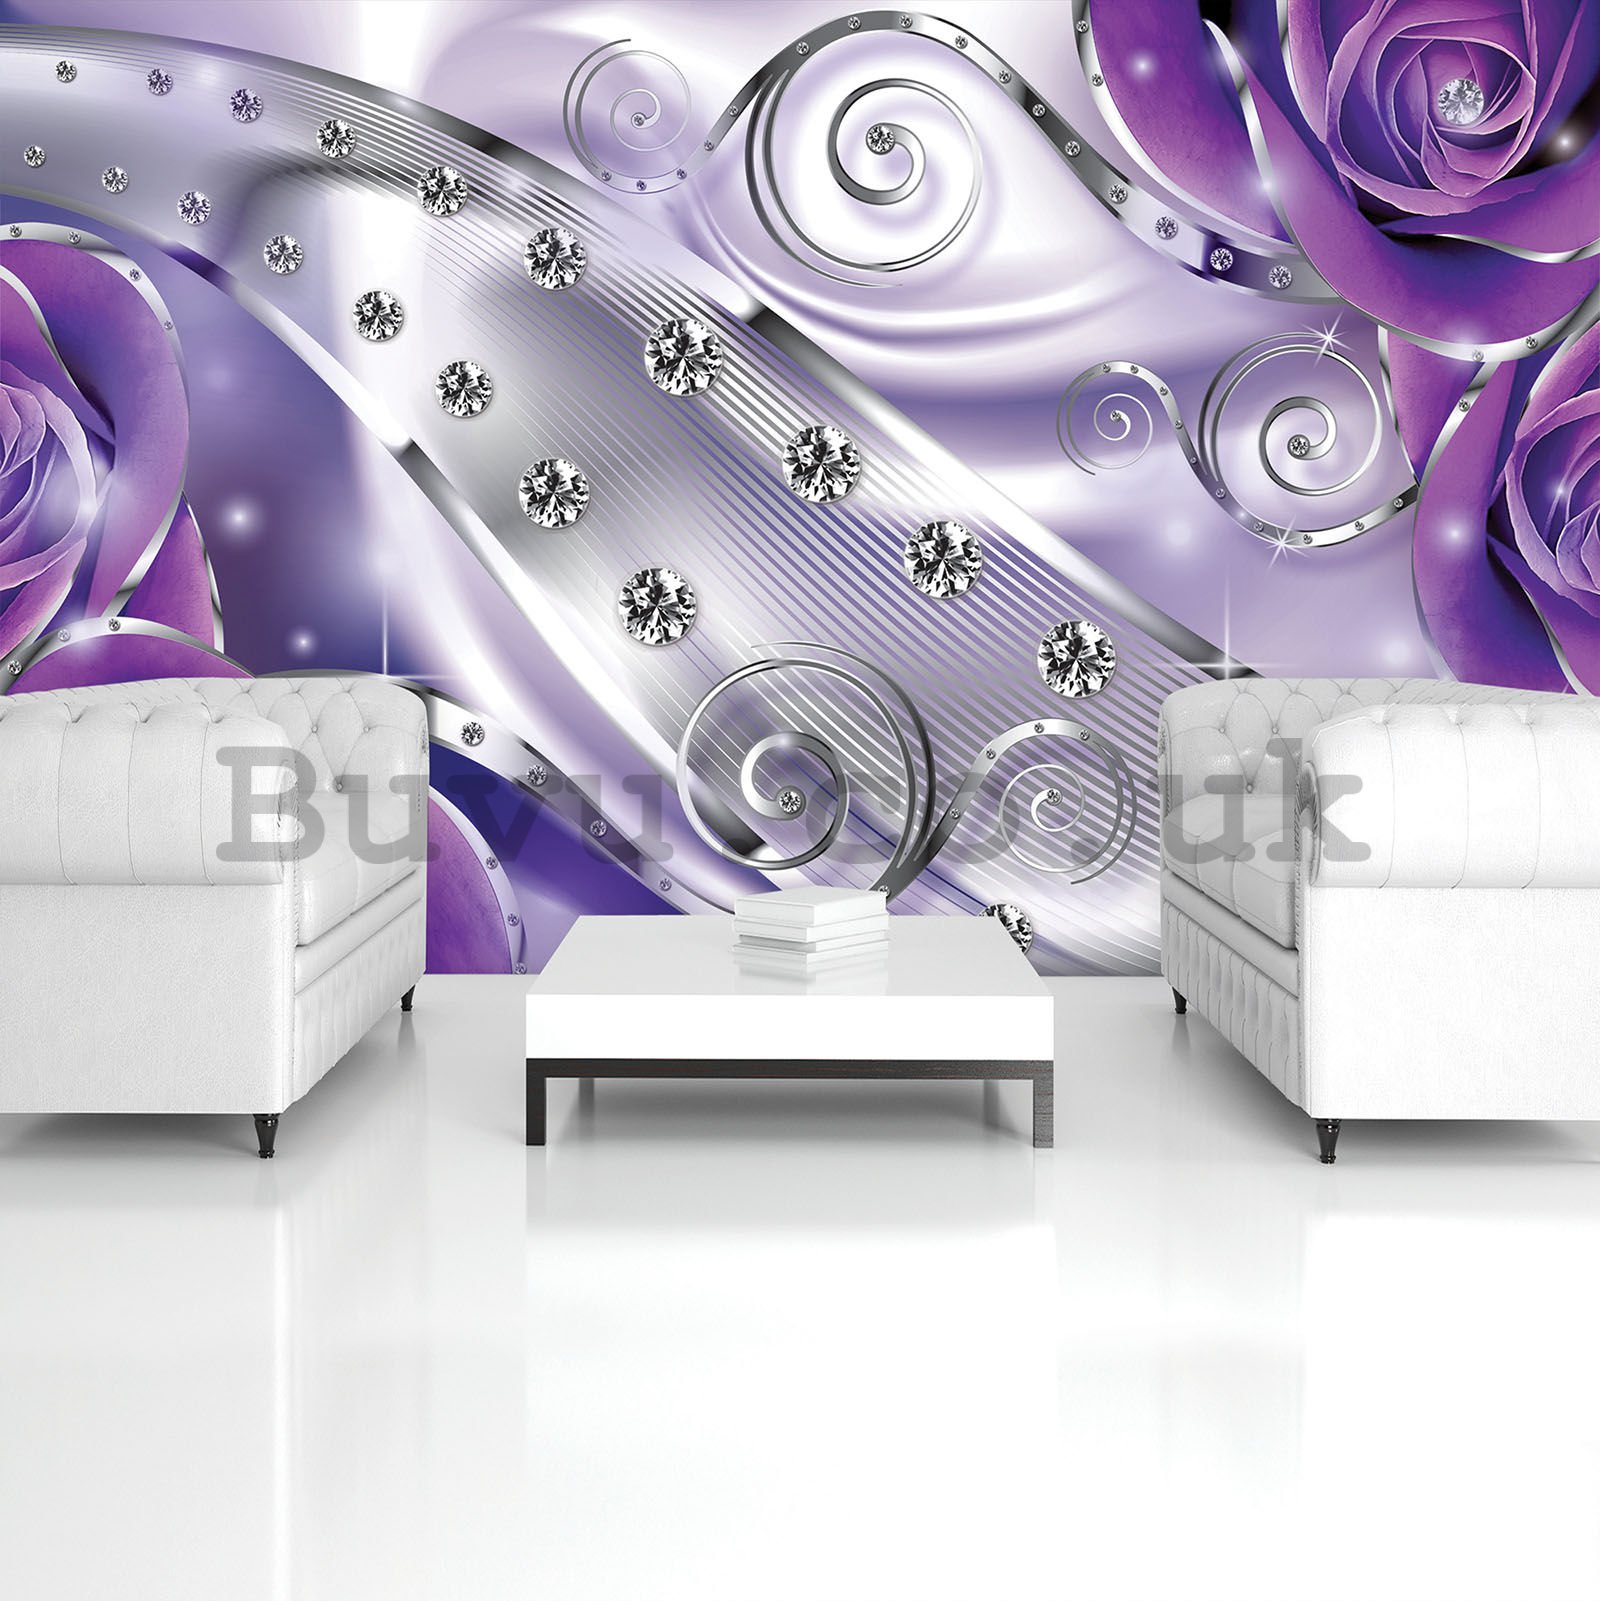 Wall mural: Luxury abstraction (purple) - 254x184 cm